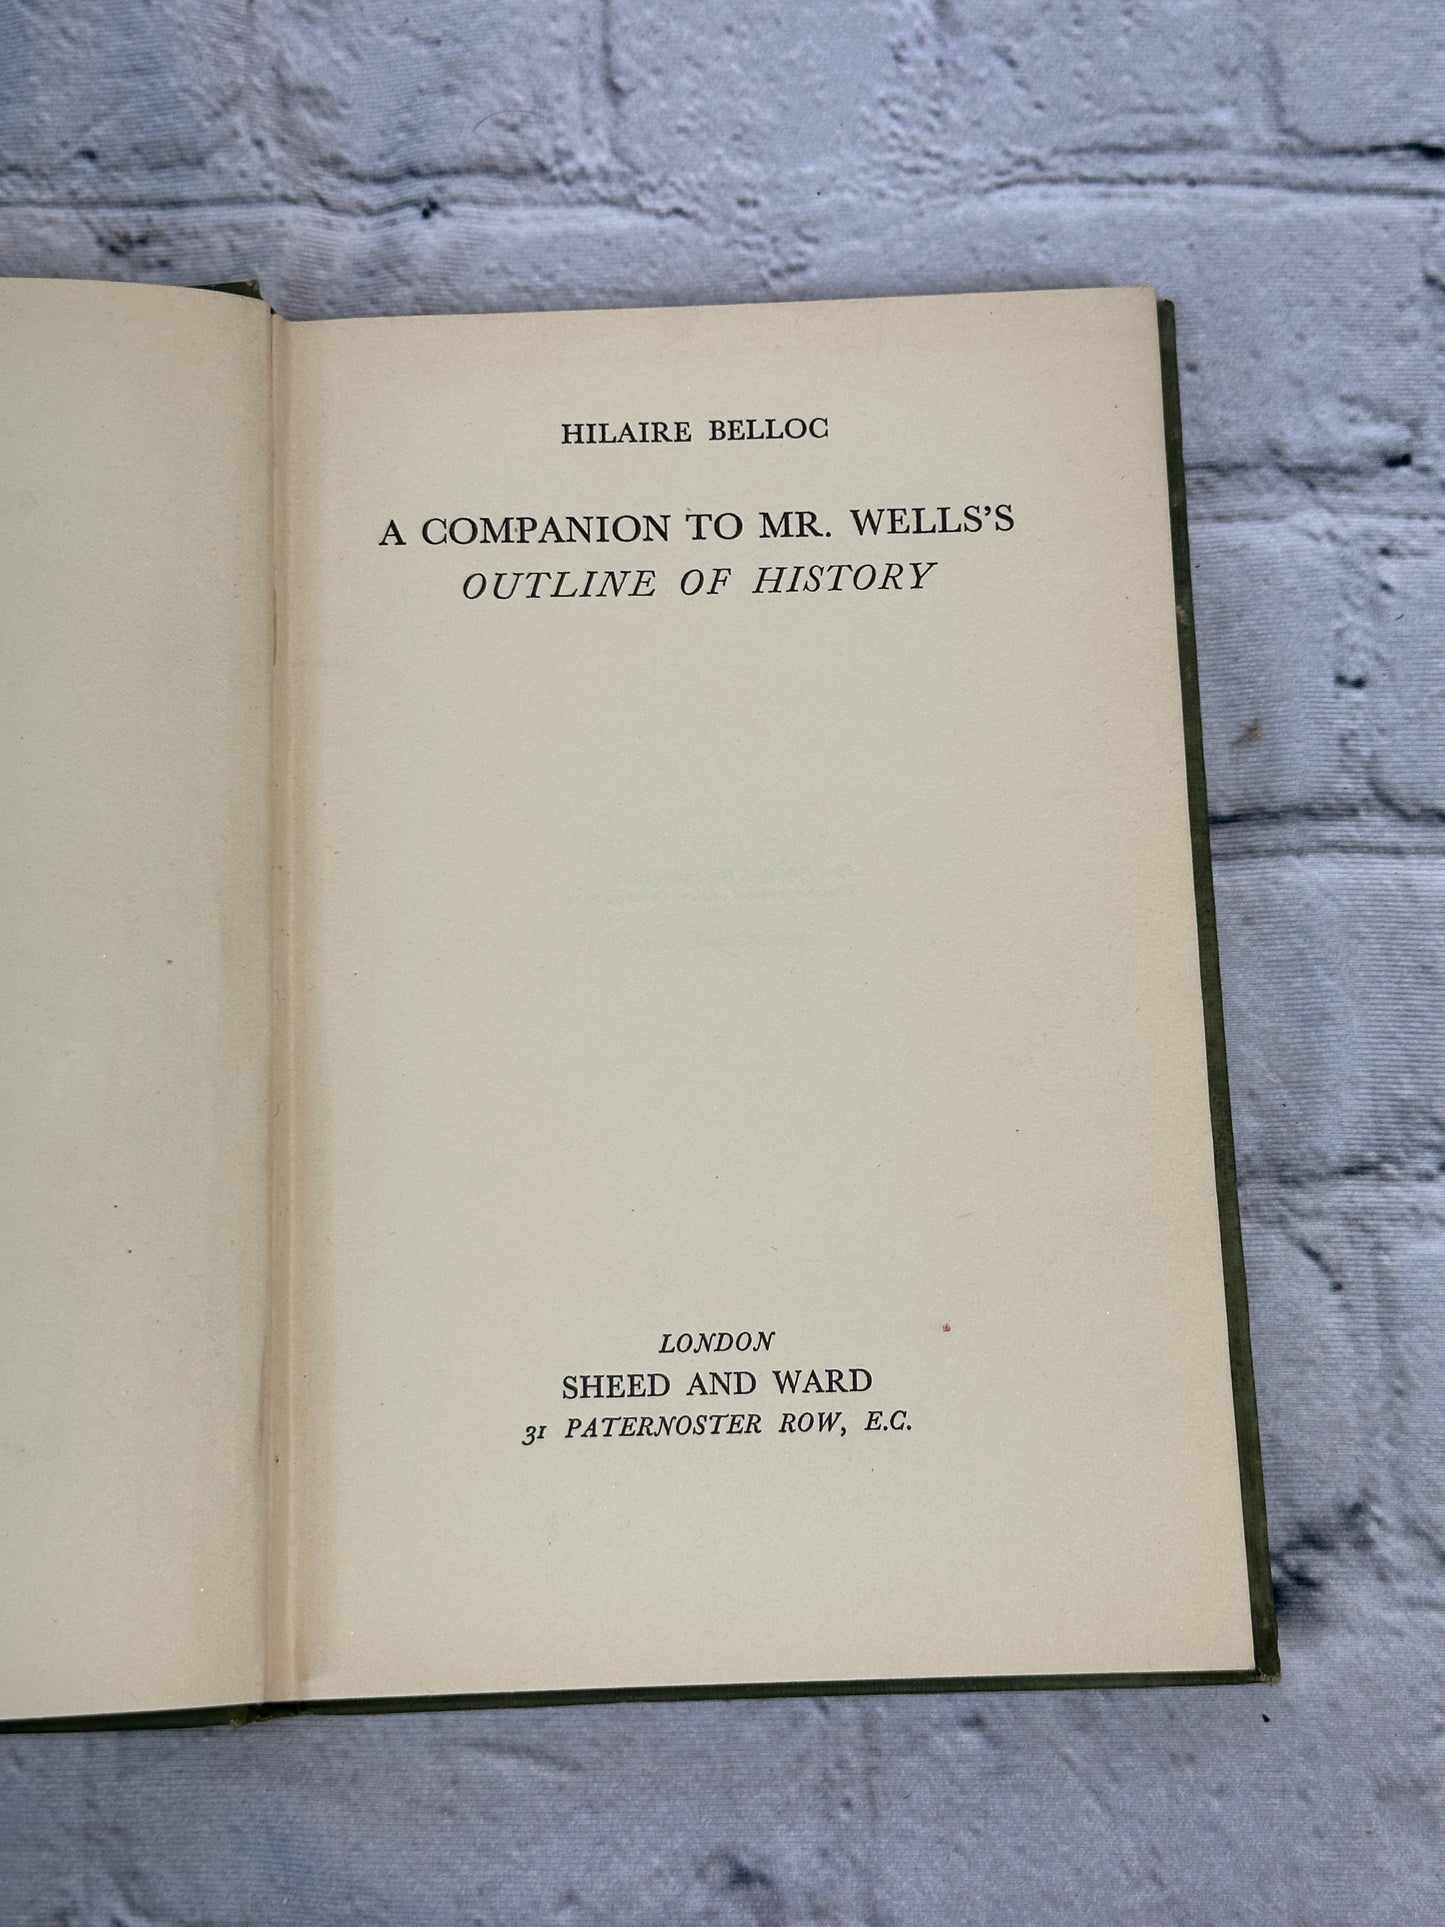 A Companion to Mr. Wells's Outline of History by Hilaire Belloc [1929]